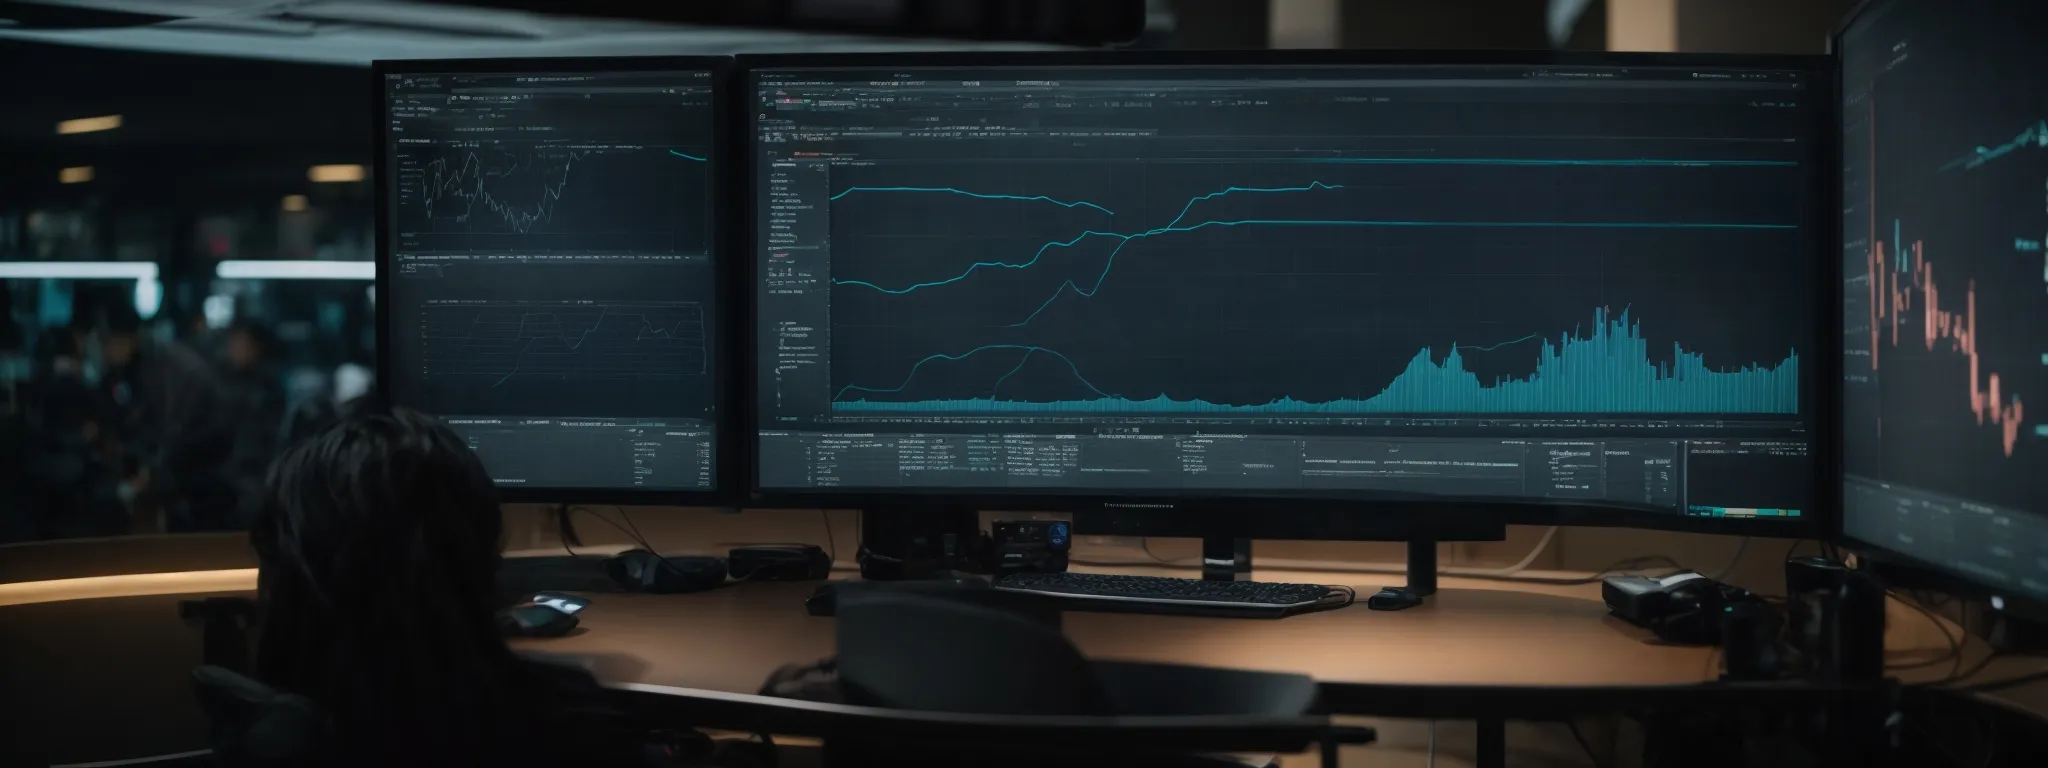 a person sits before a large monitor displaying graphs and analytics, deeply focused on identifying patterns and discrepancies in digital data.